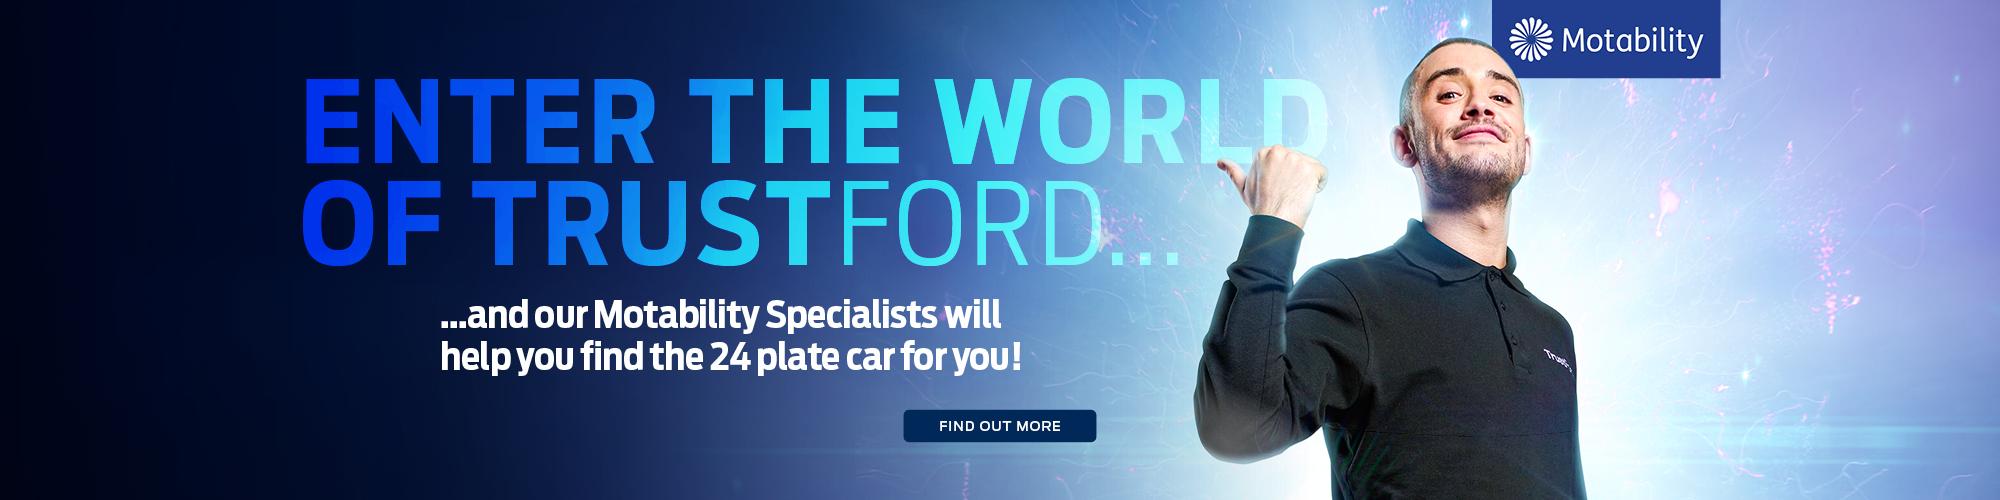 The World of TrustFord Banner (L)